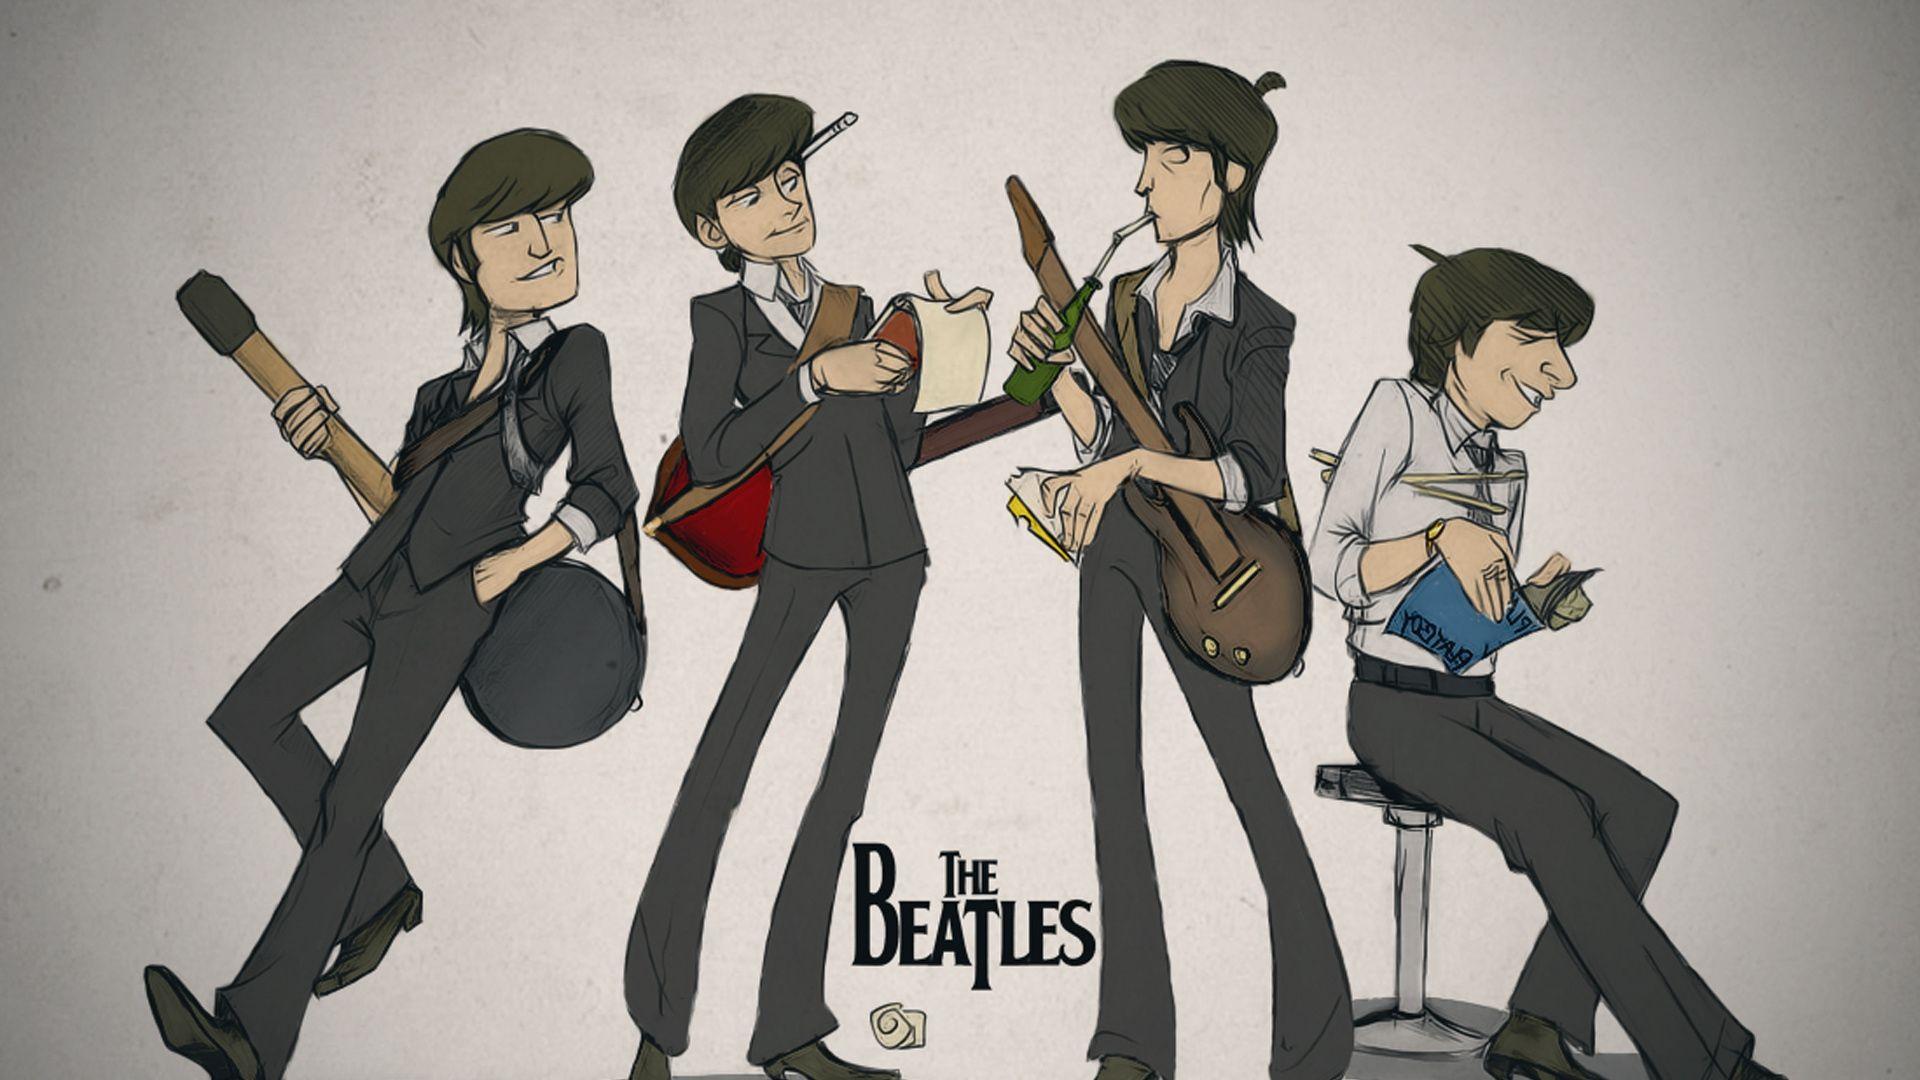 The Beatles Wallpaper, PC, Lap The Beatles Background in FHD